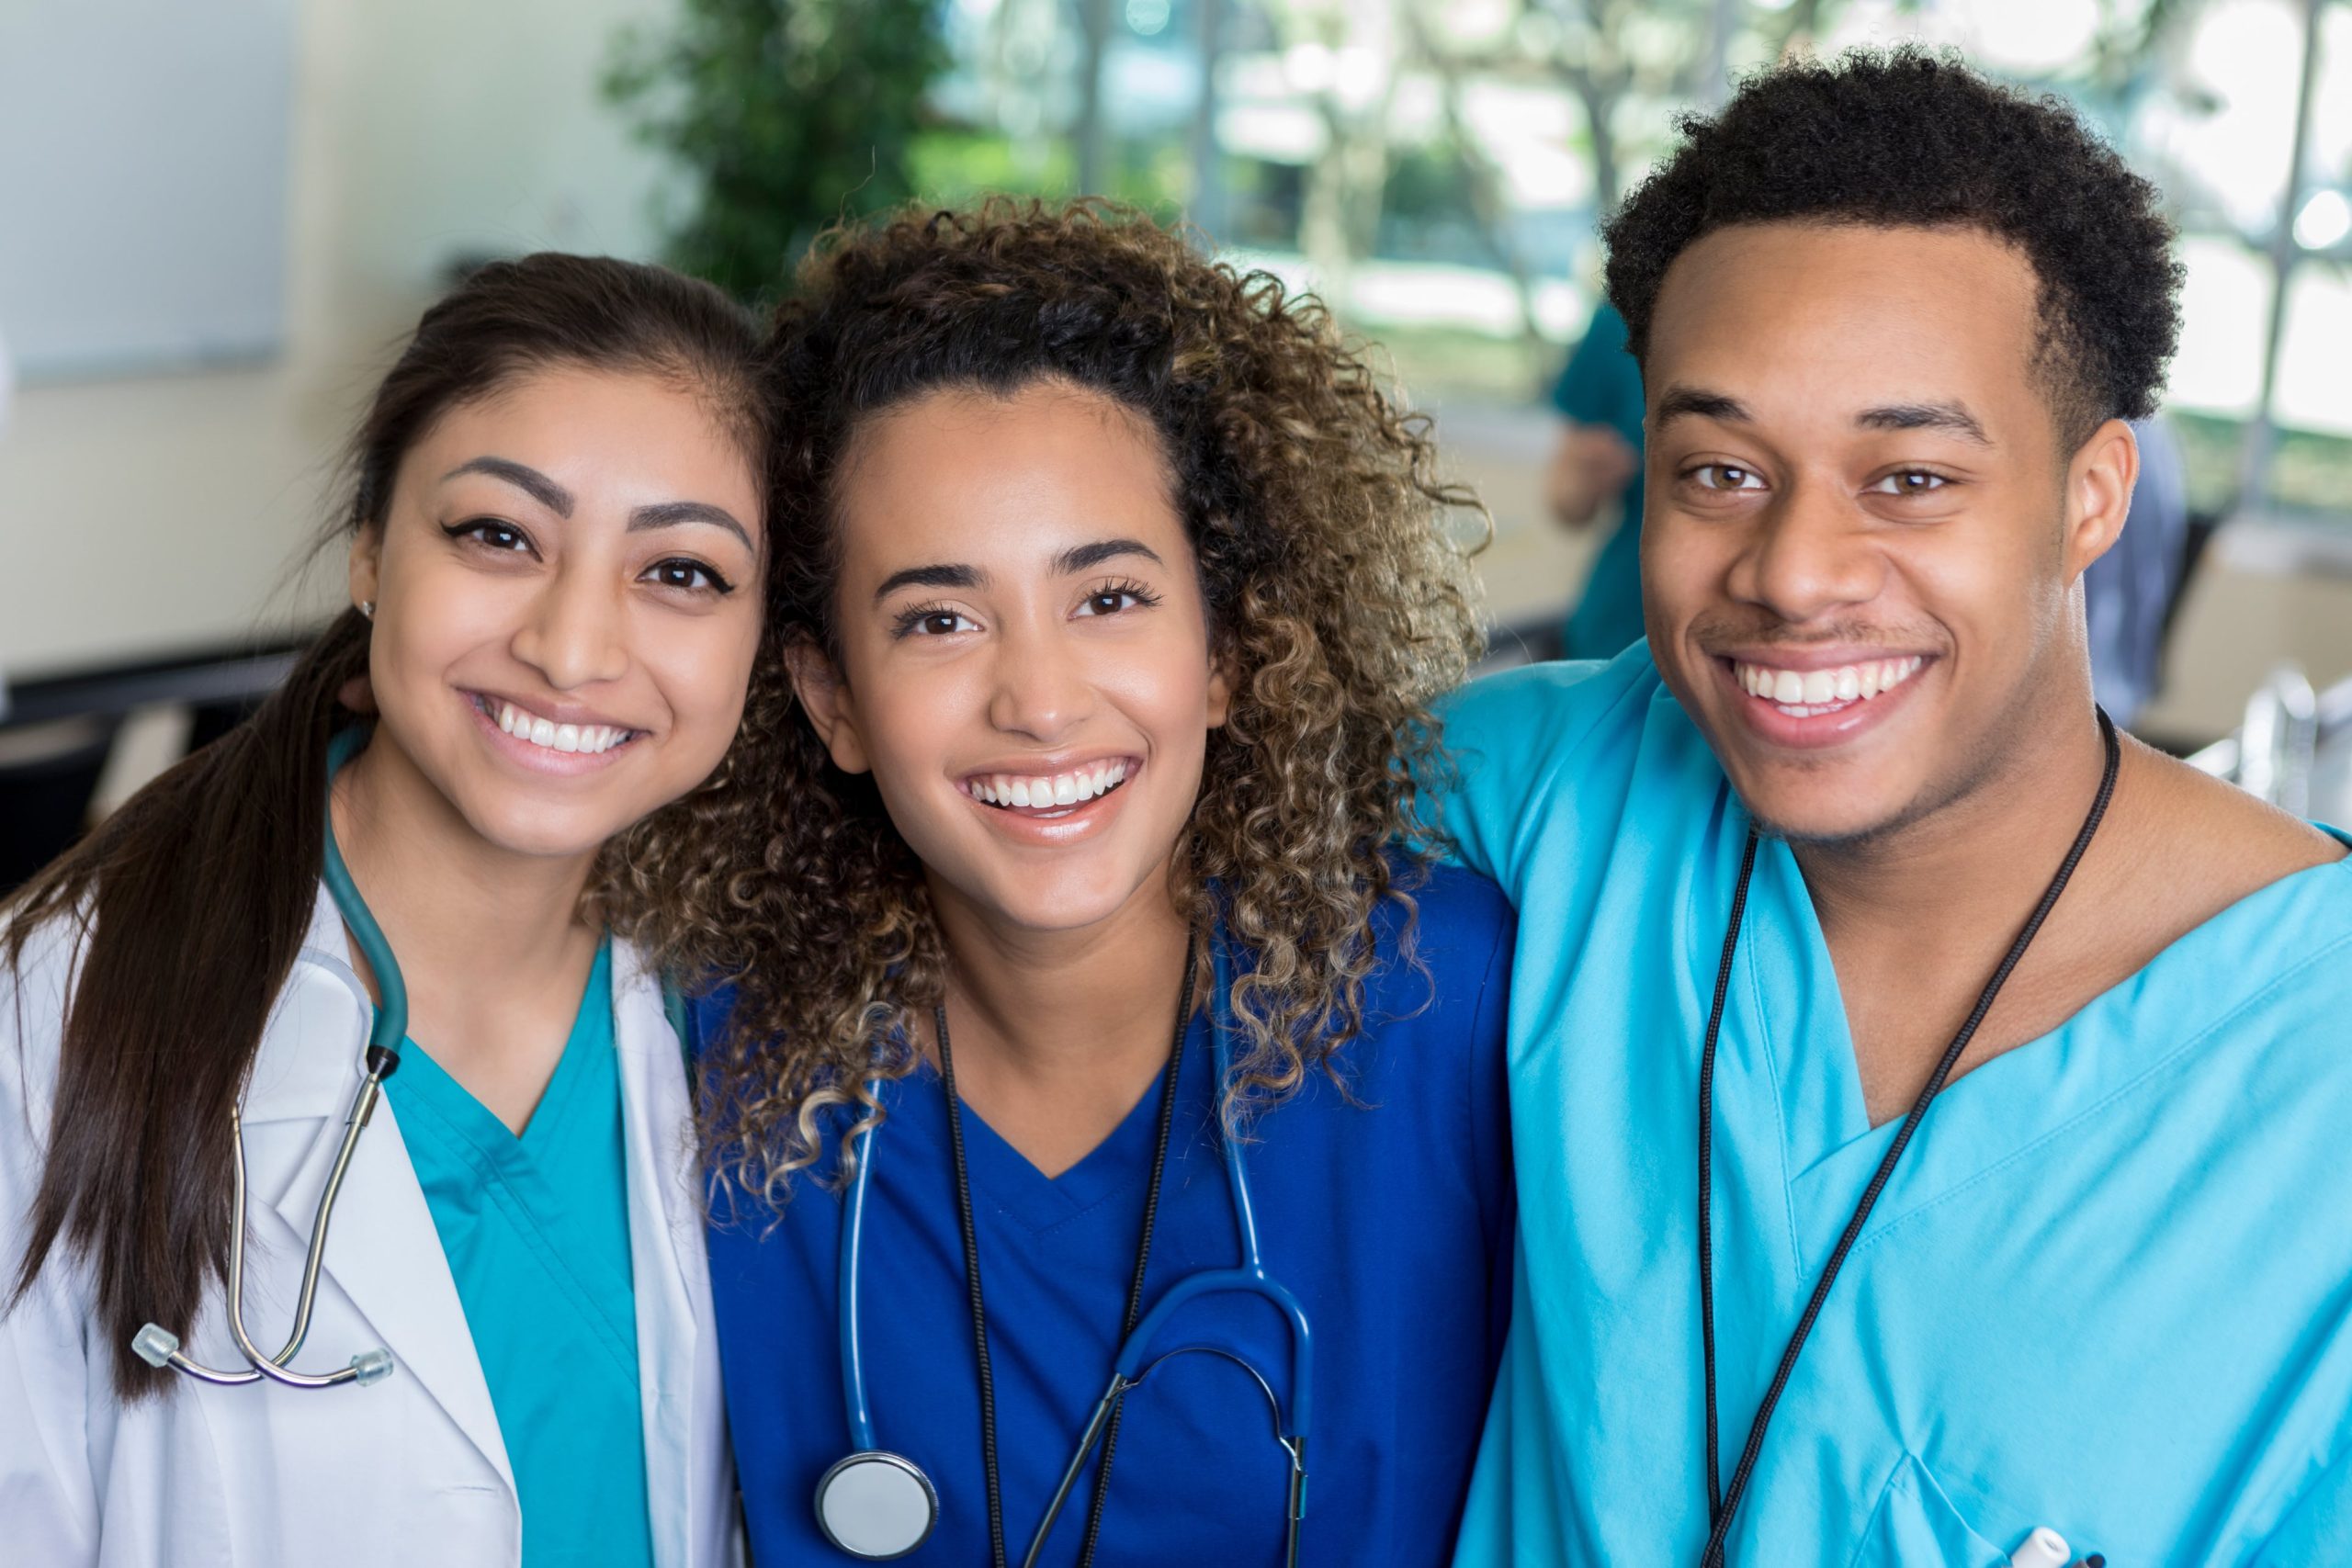 Finding Healthcare Nurse Staffing Services